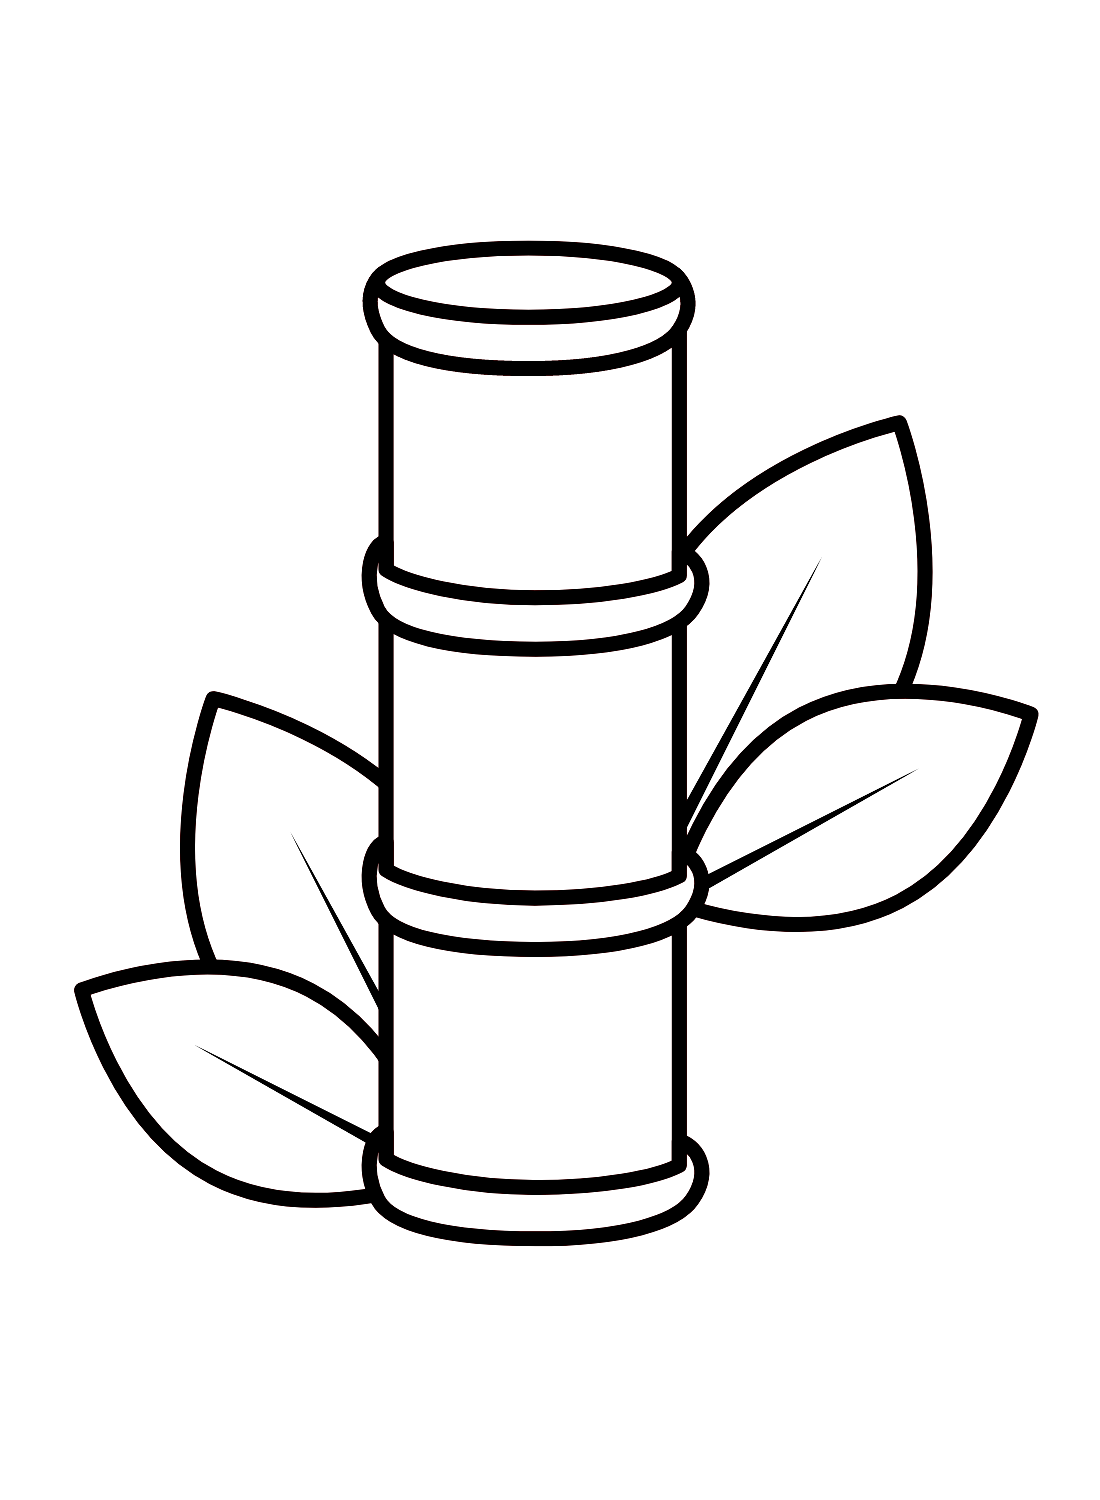 Japanese Bamboo Coloring Page